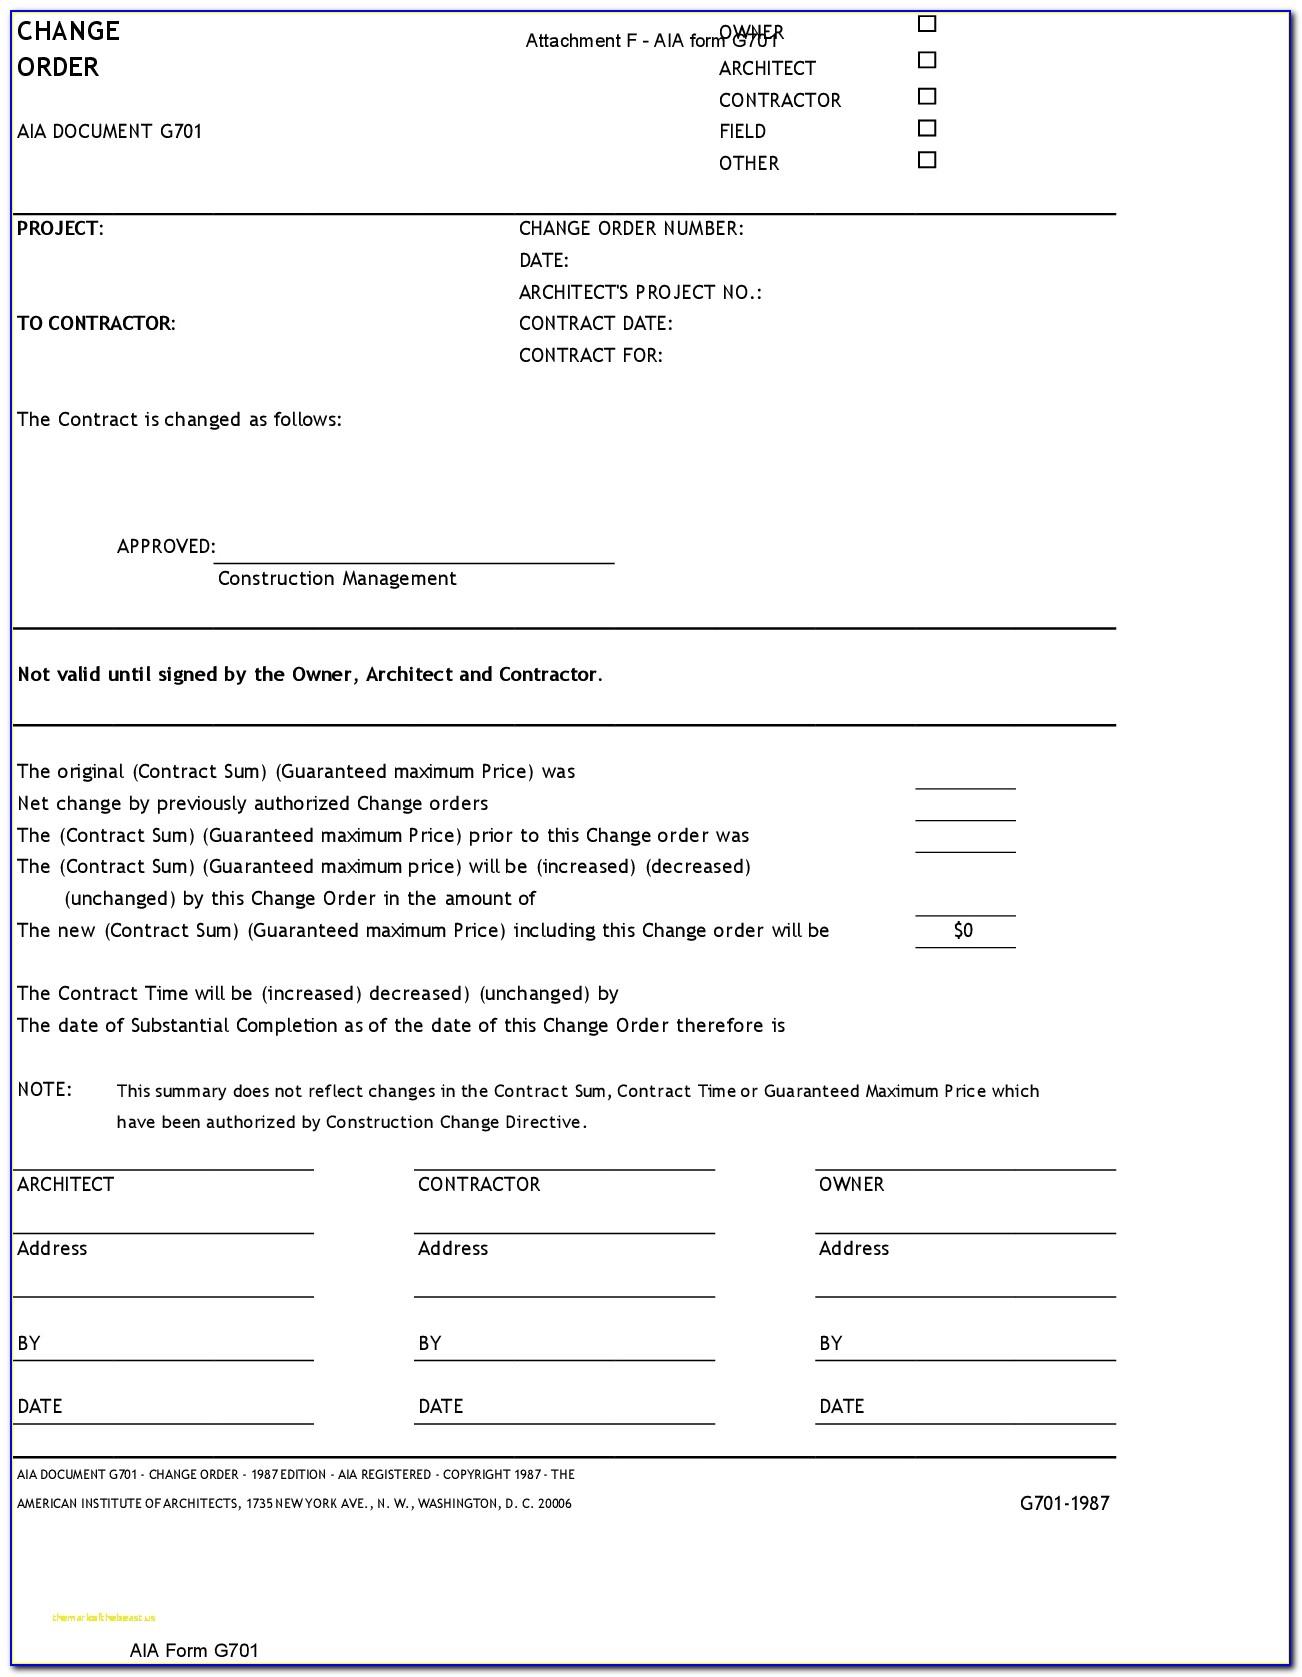 Blank Aia G701 Form